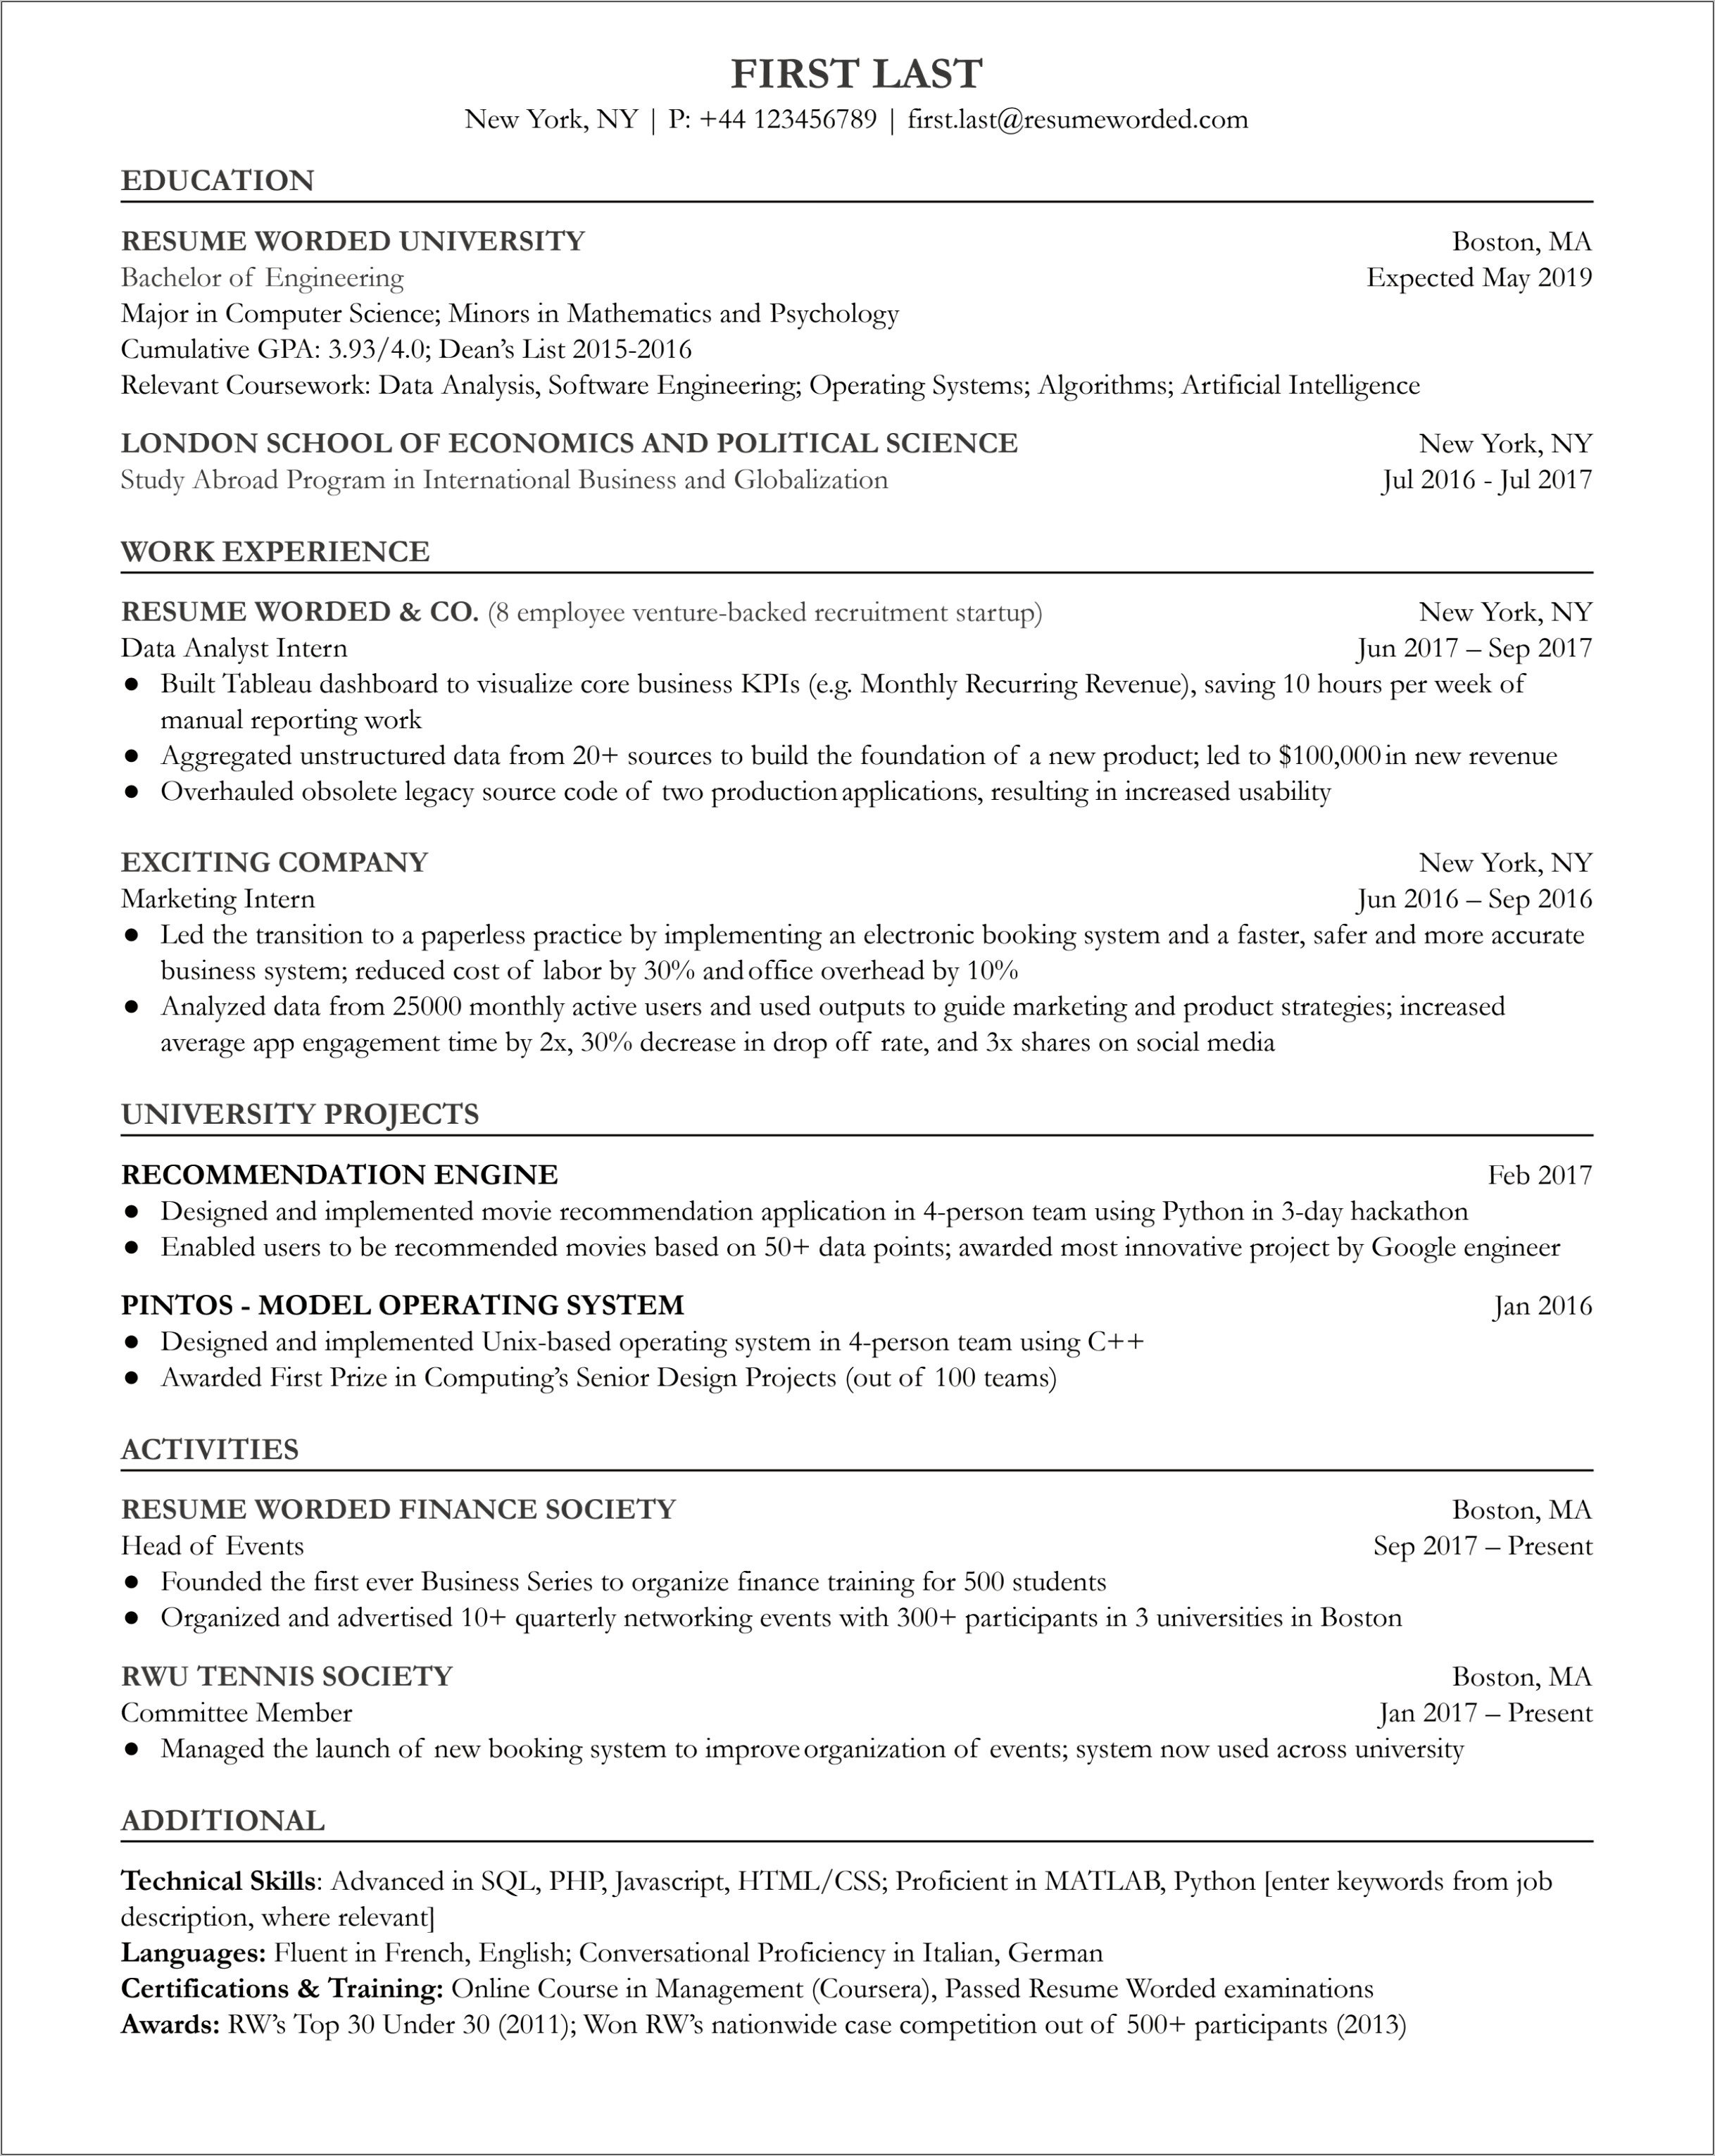 Sample Resume For Experienced Data Analyst